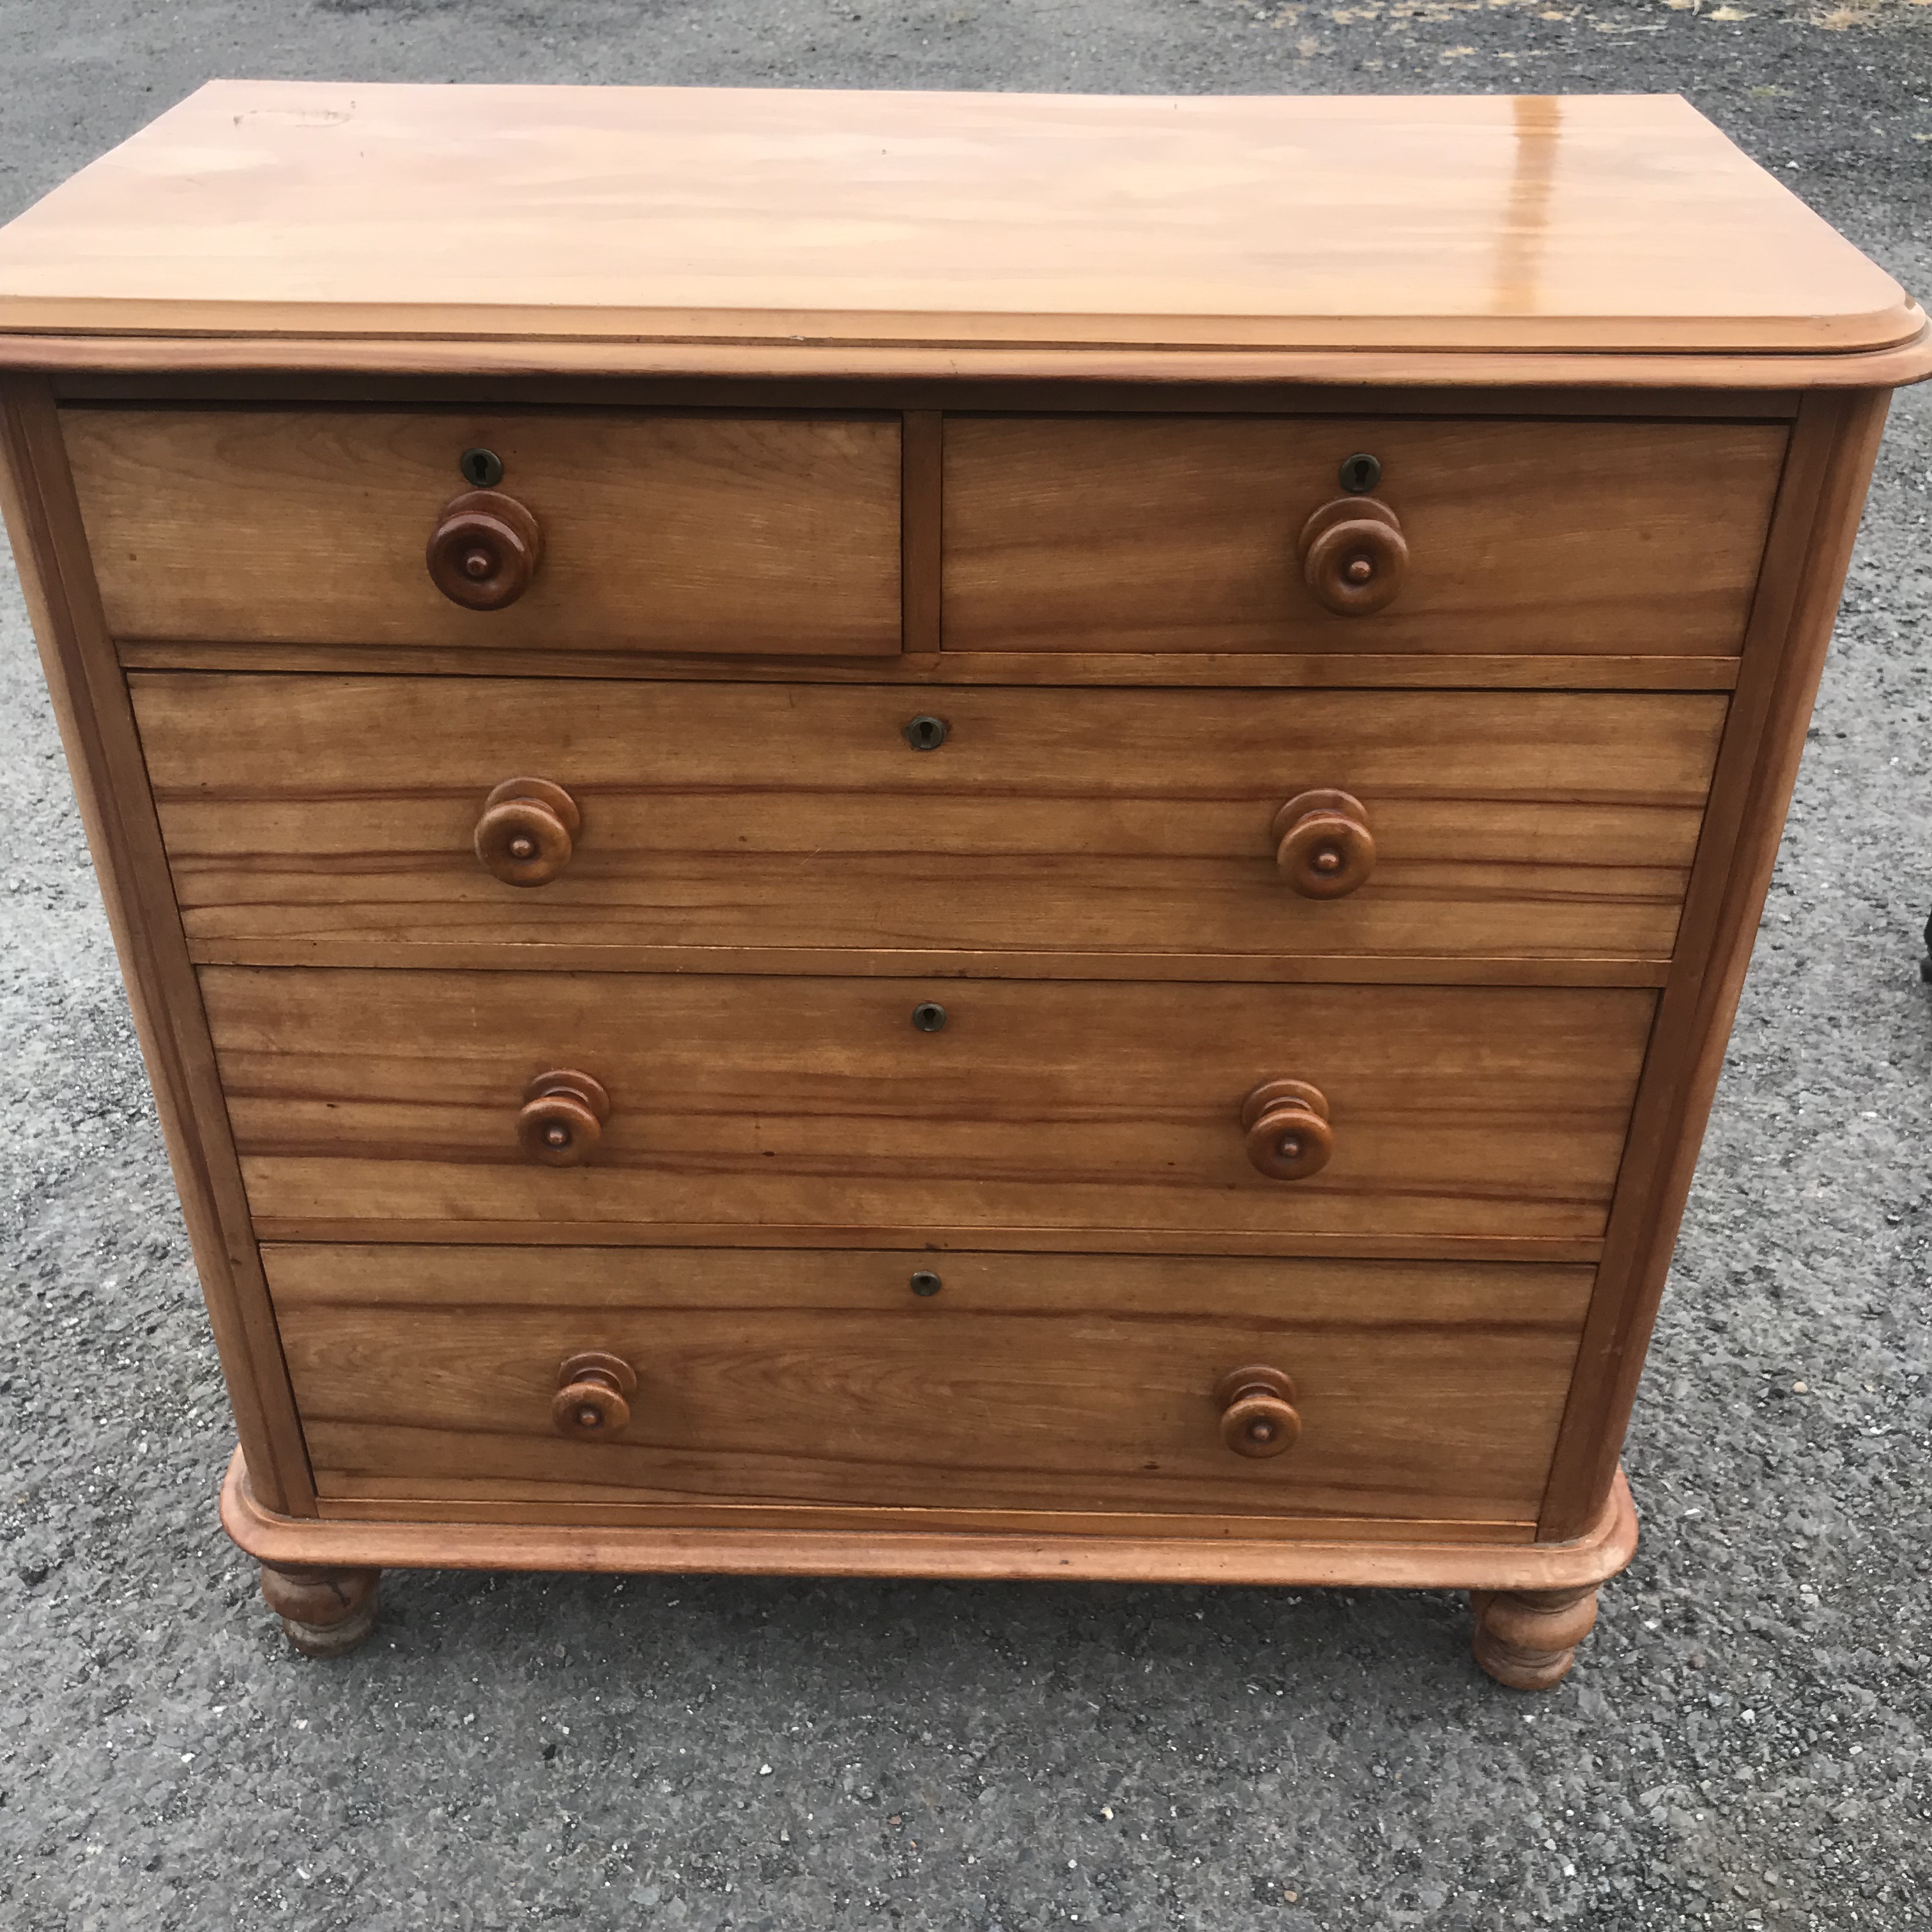 ANTIQUE VICTORIAN FRUITWOOD CHEST OF DRAWERS